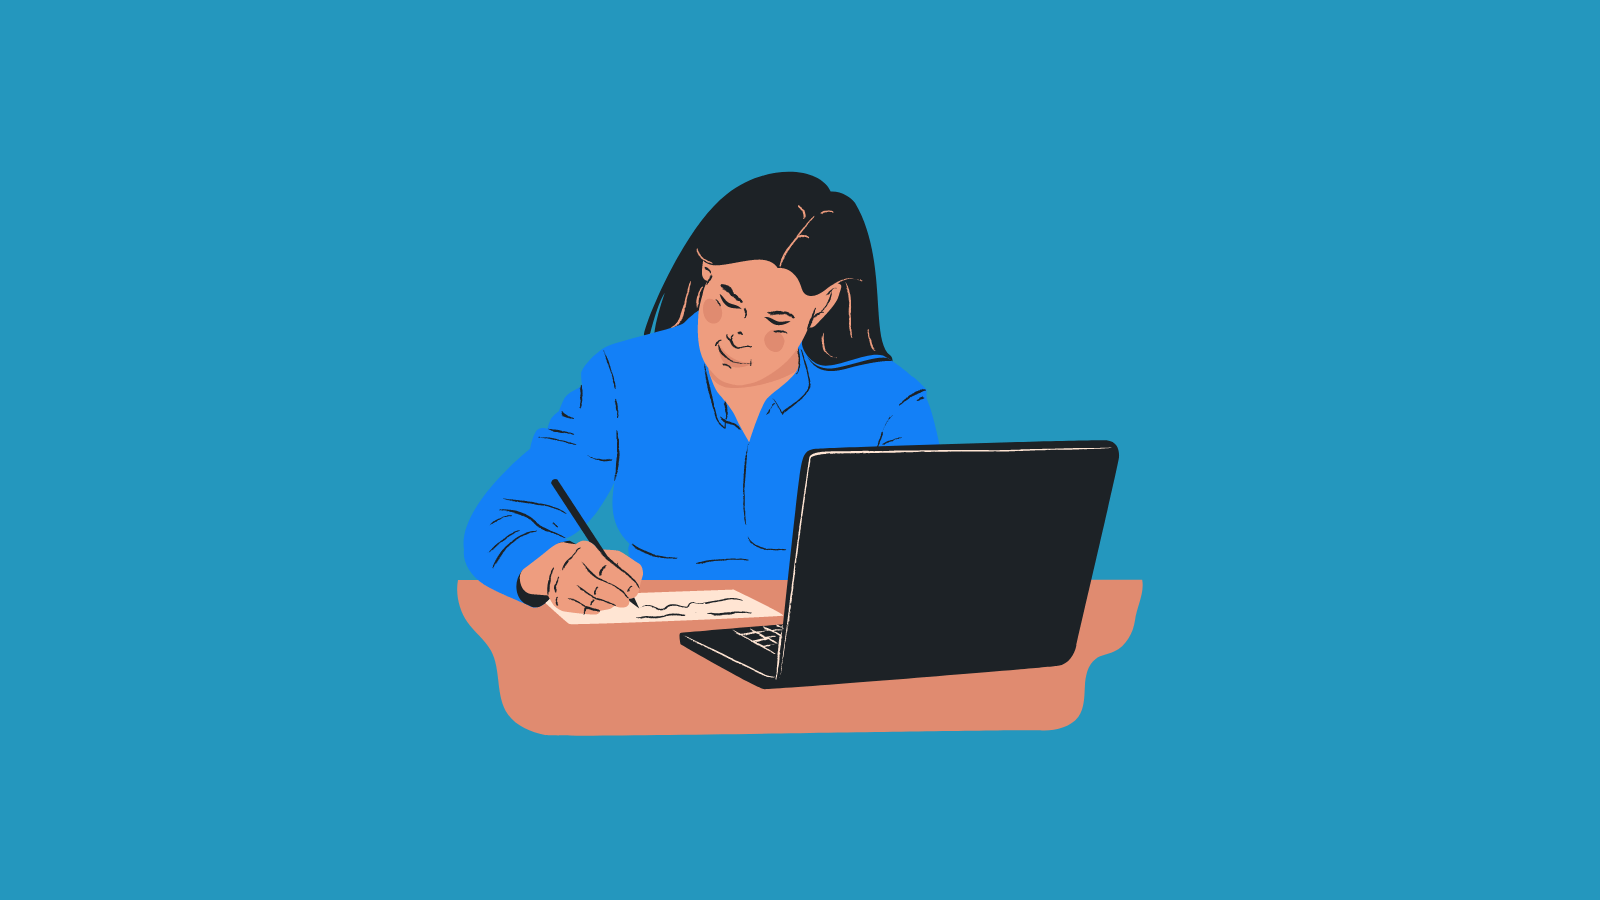 A woman taking notes while using a computer